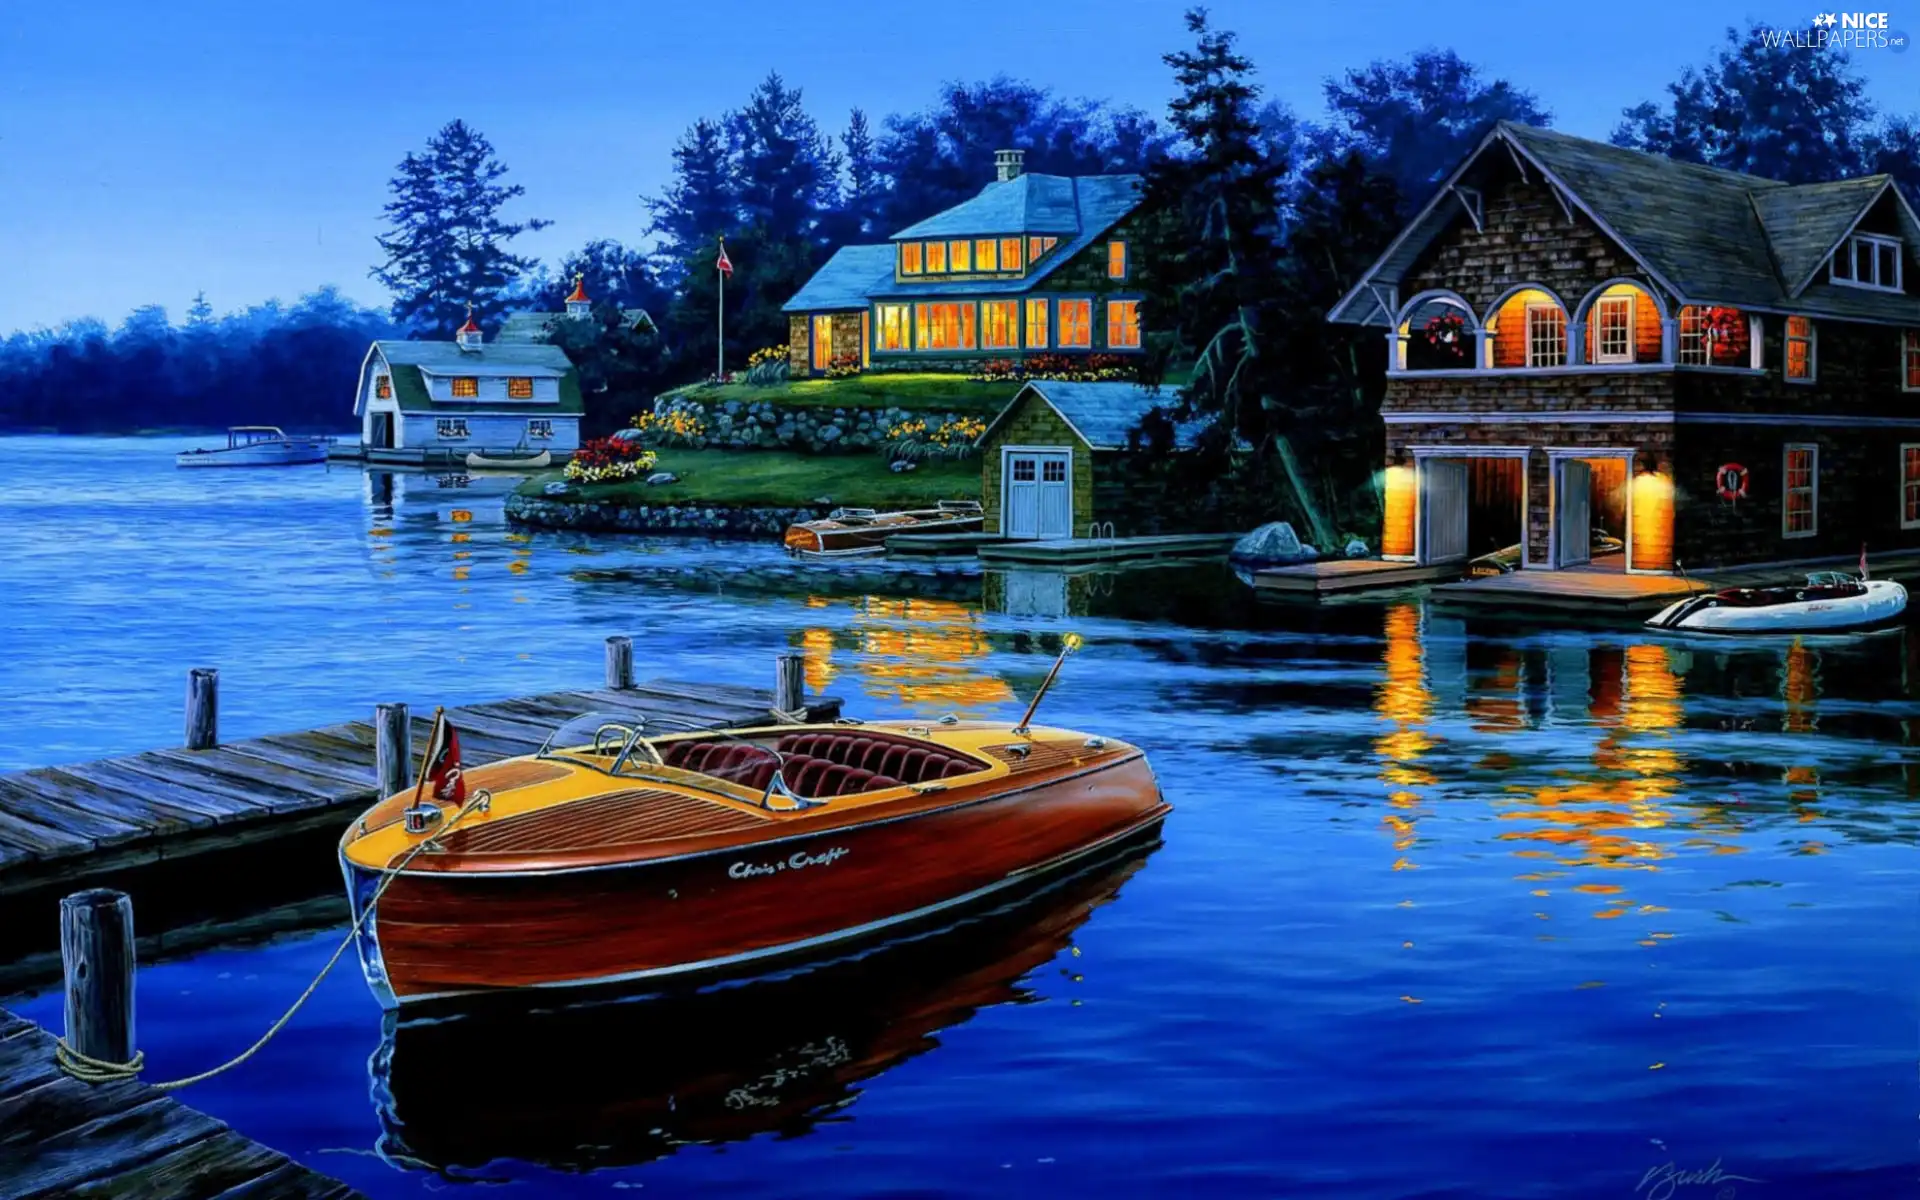 Boat, evening, by, lake, Houses